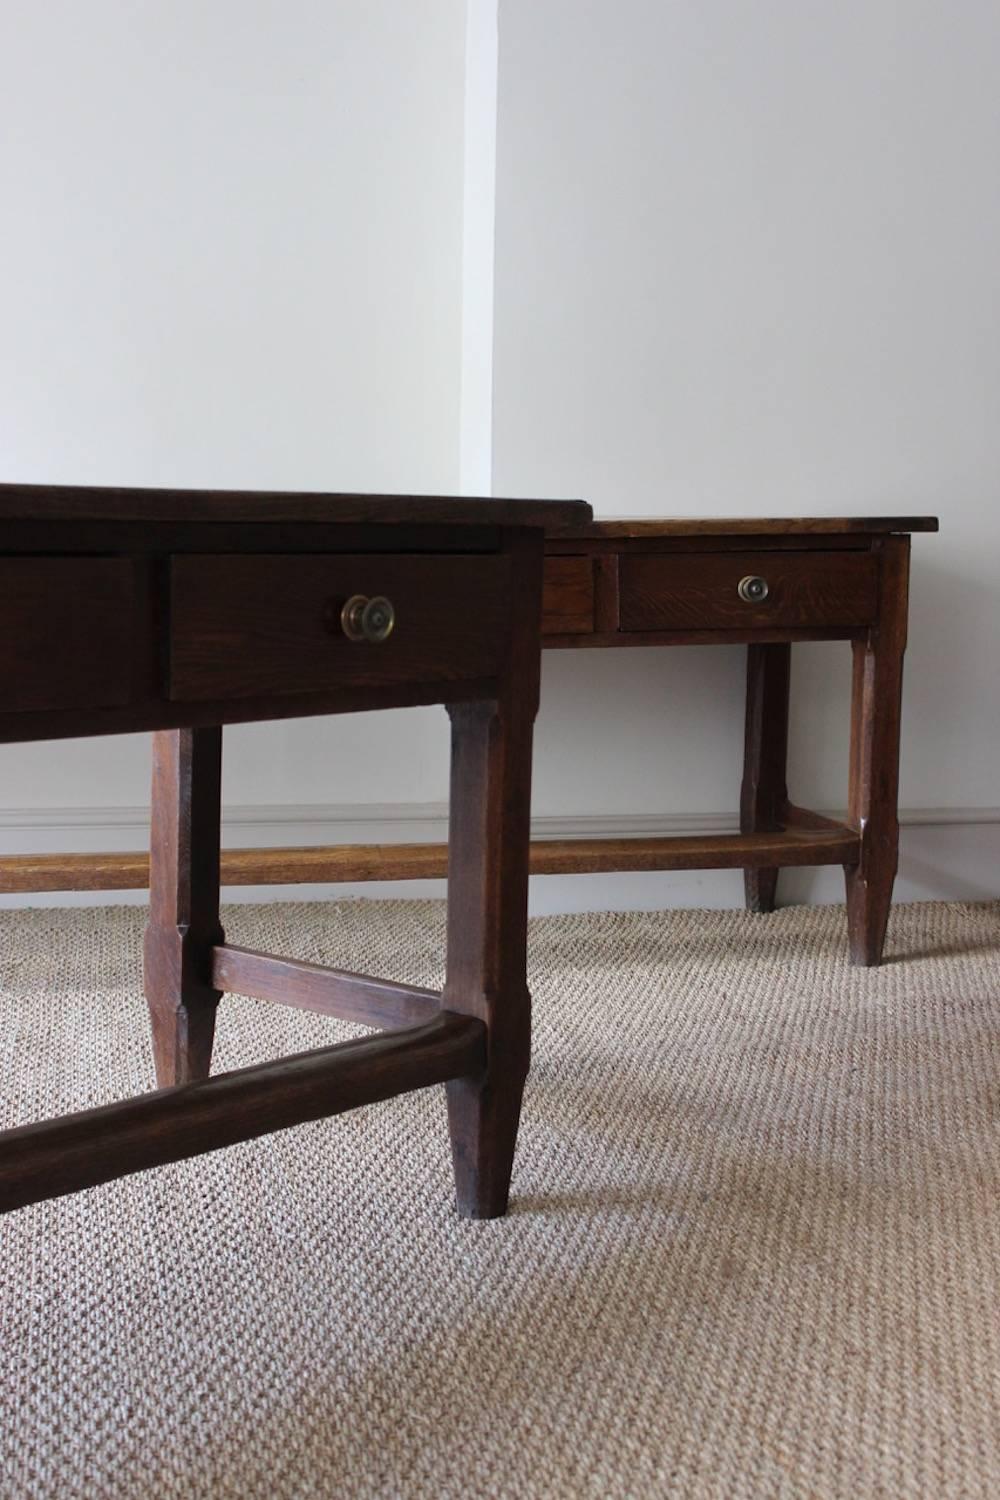 A large and impressive pair of early to mid-19th century French oak serving tables, each with six drawers, on chamfered square legs and tapering feet.